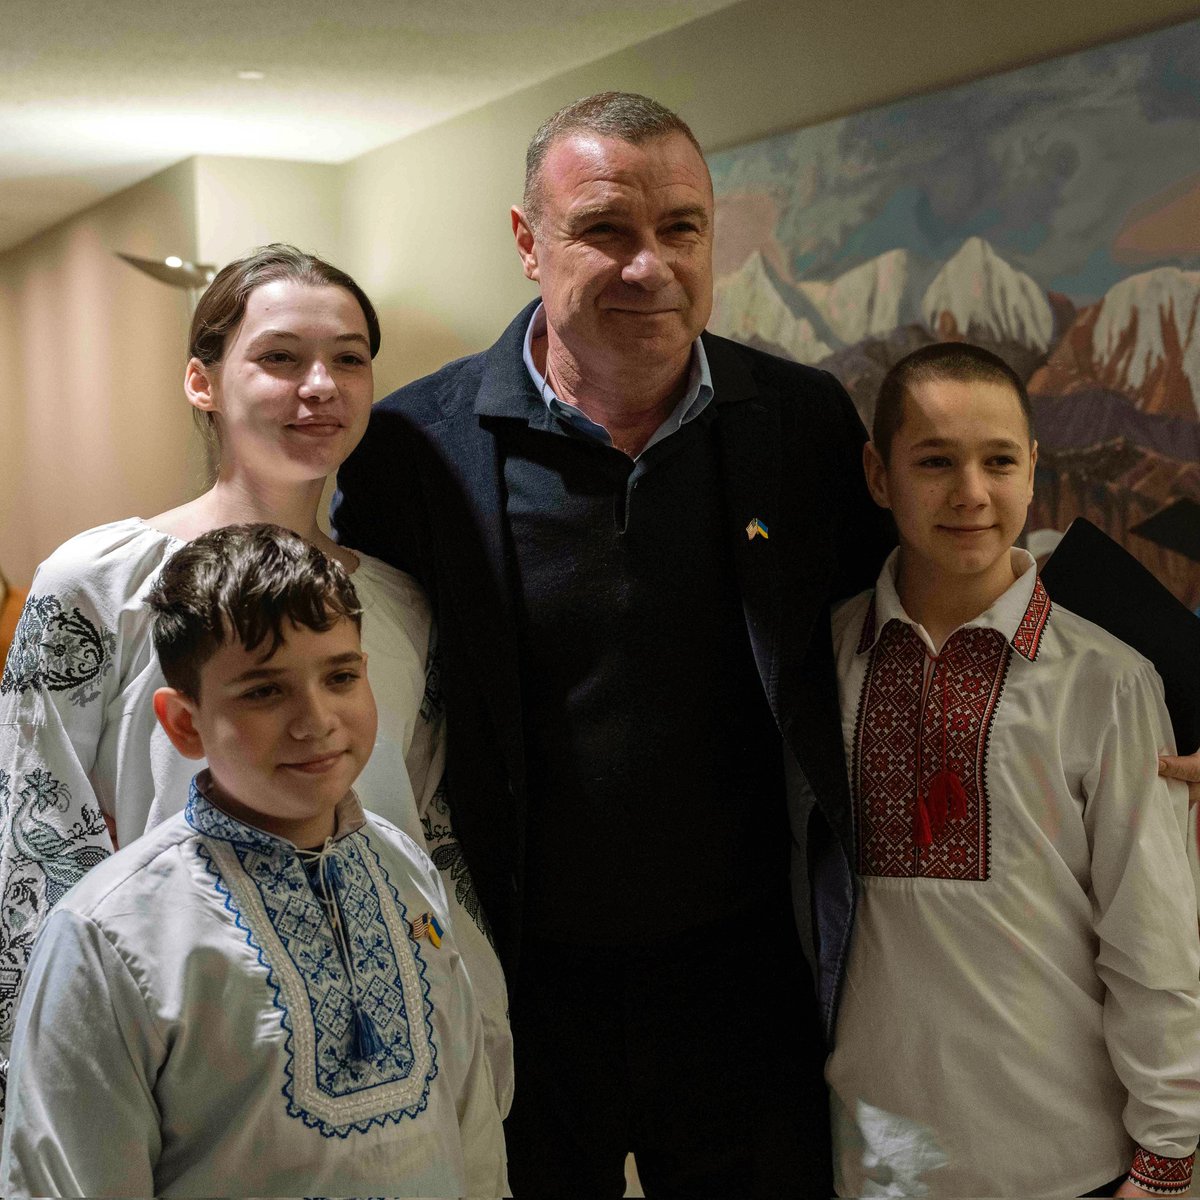 🌟 Shoutout to TV producer and actor @LievSchreiber, co-founder of @BluCheckUkraine and co-chair of @BuildersUkraine! 

These organizations amplify the stories of 🇺🇦 affected by the Russian aggression, especially children, to inspire support and action across the globe 👏